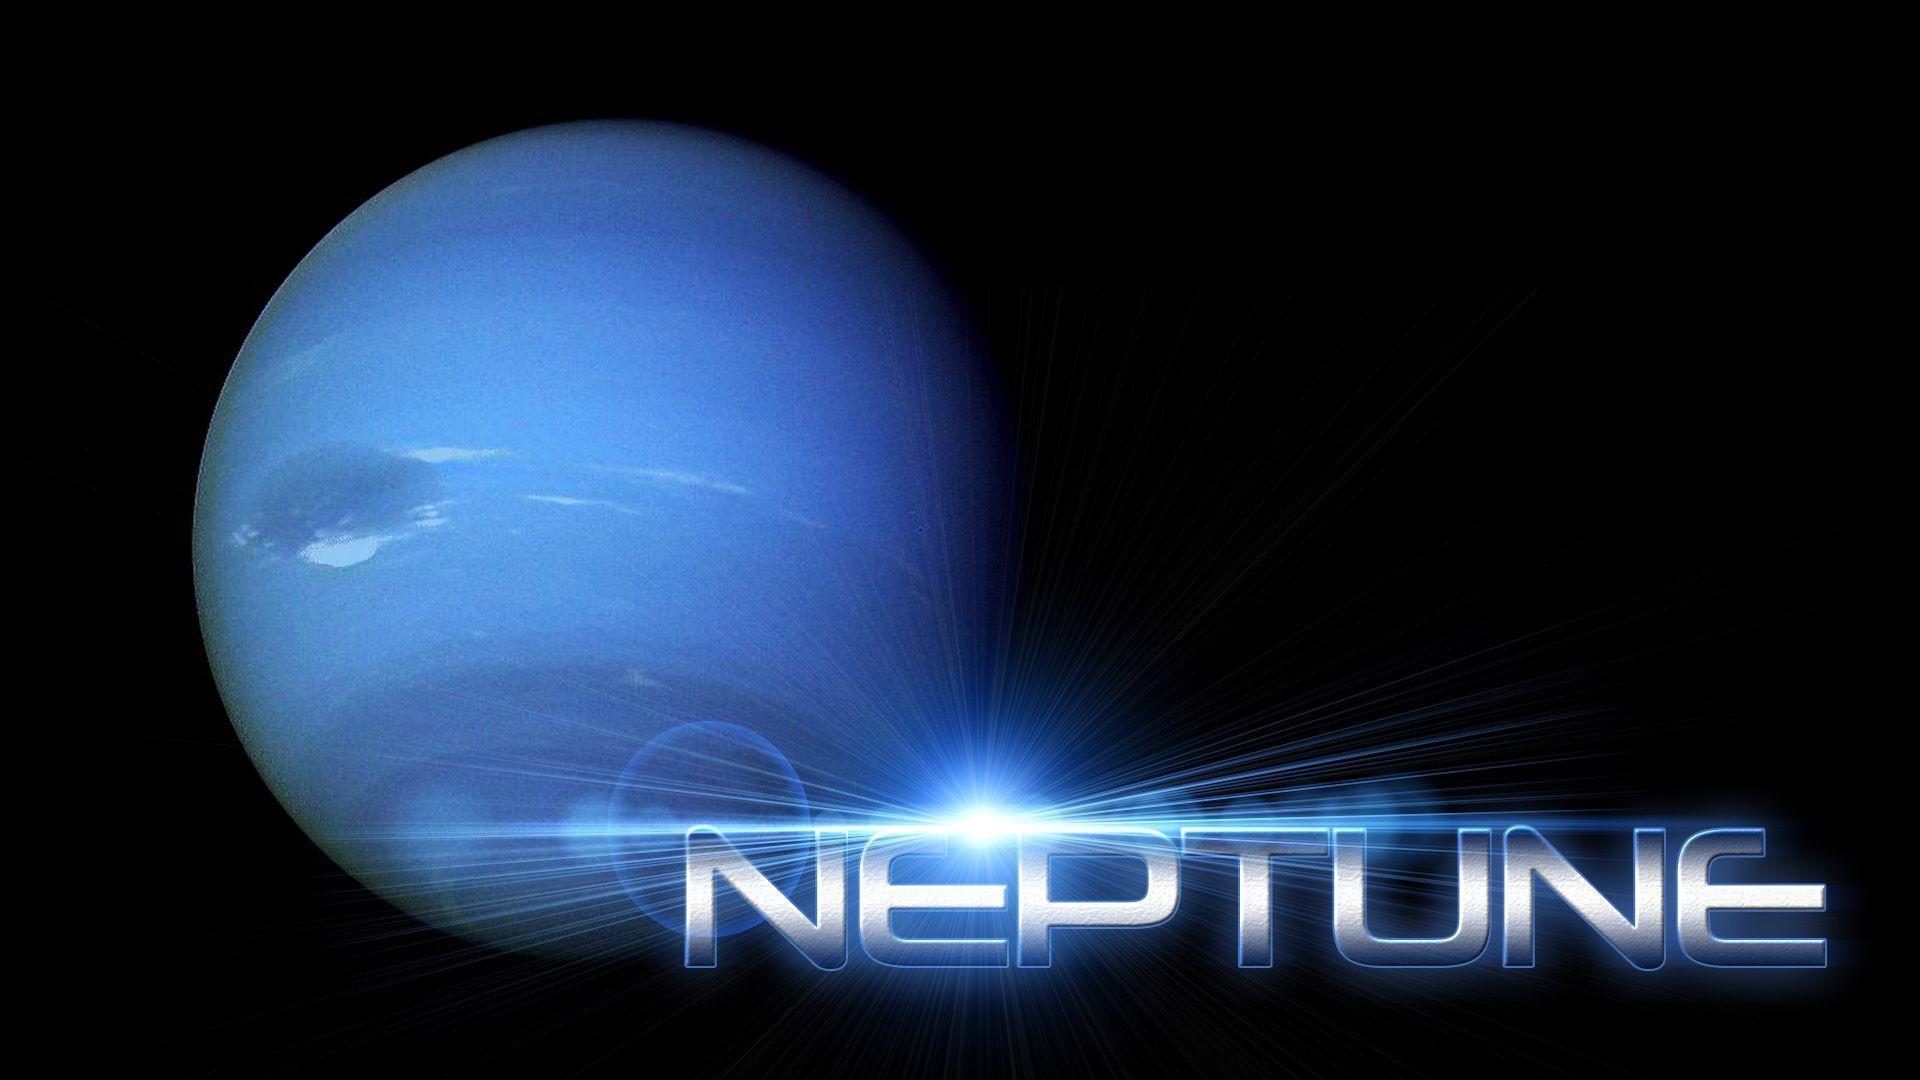 Widescreen HD Wallpaper of Neptune for Windows and Mac Systems